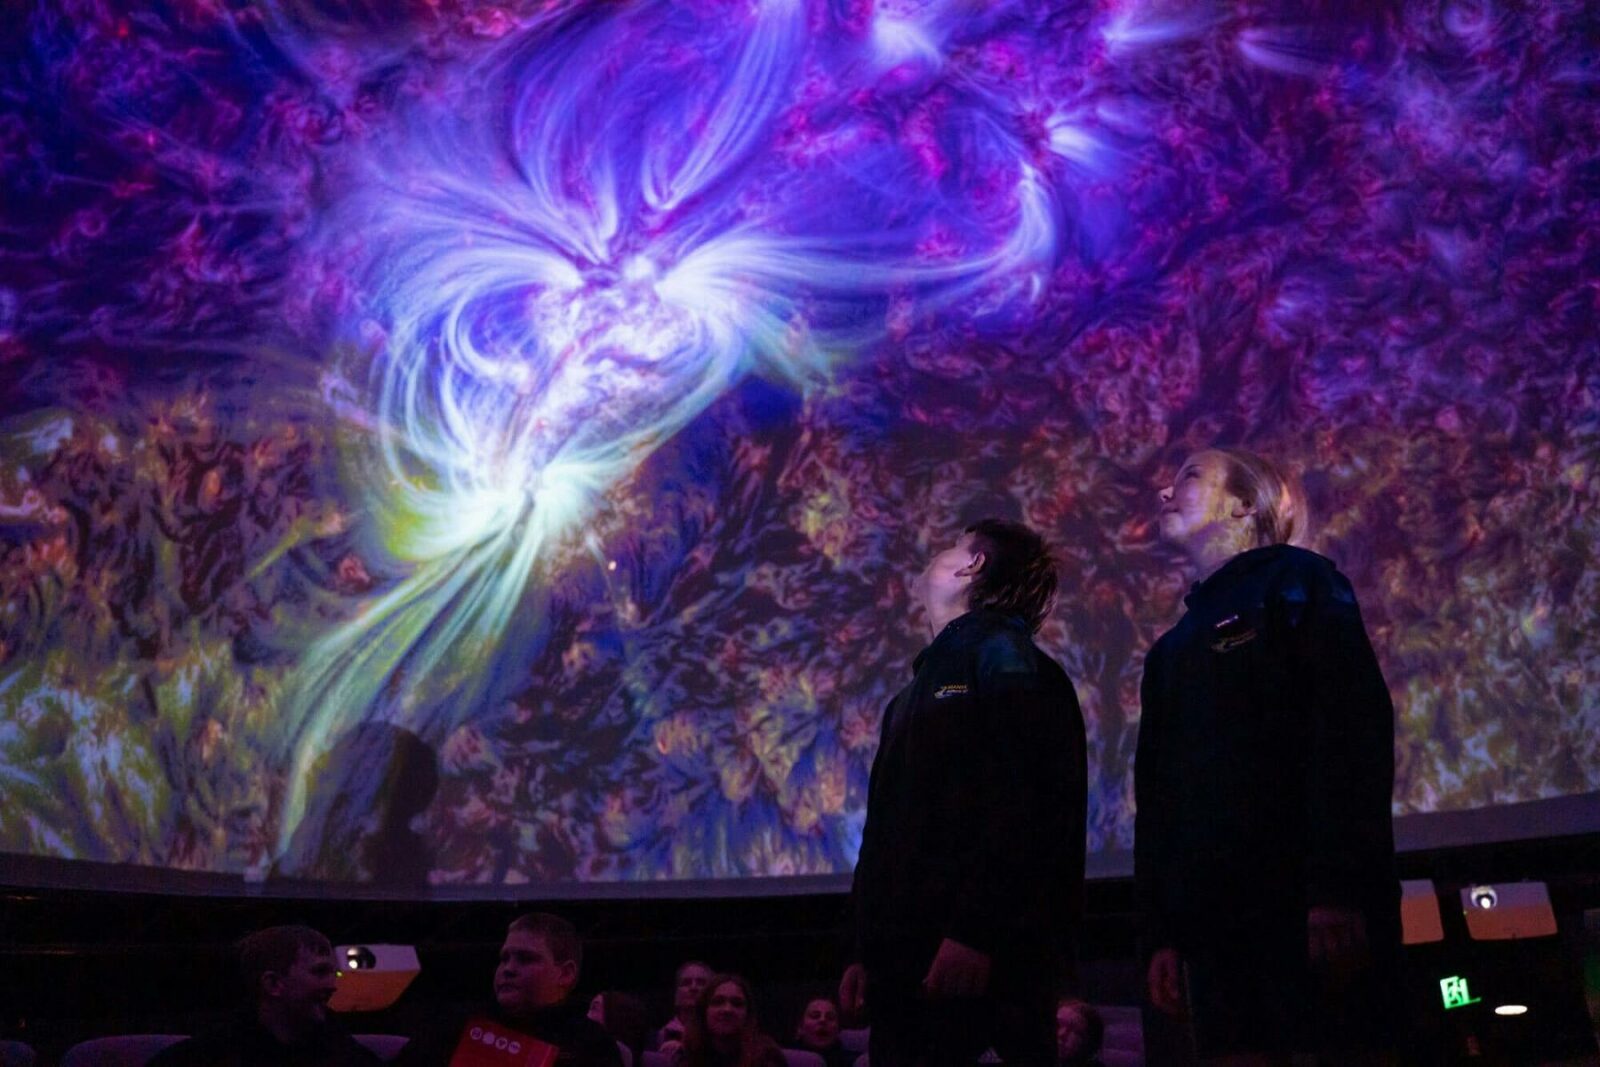 Two people standing in the planetarium during a presentation.